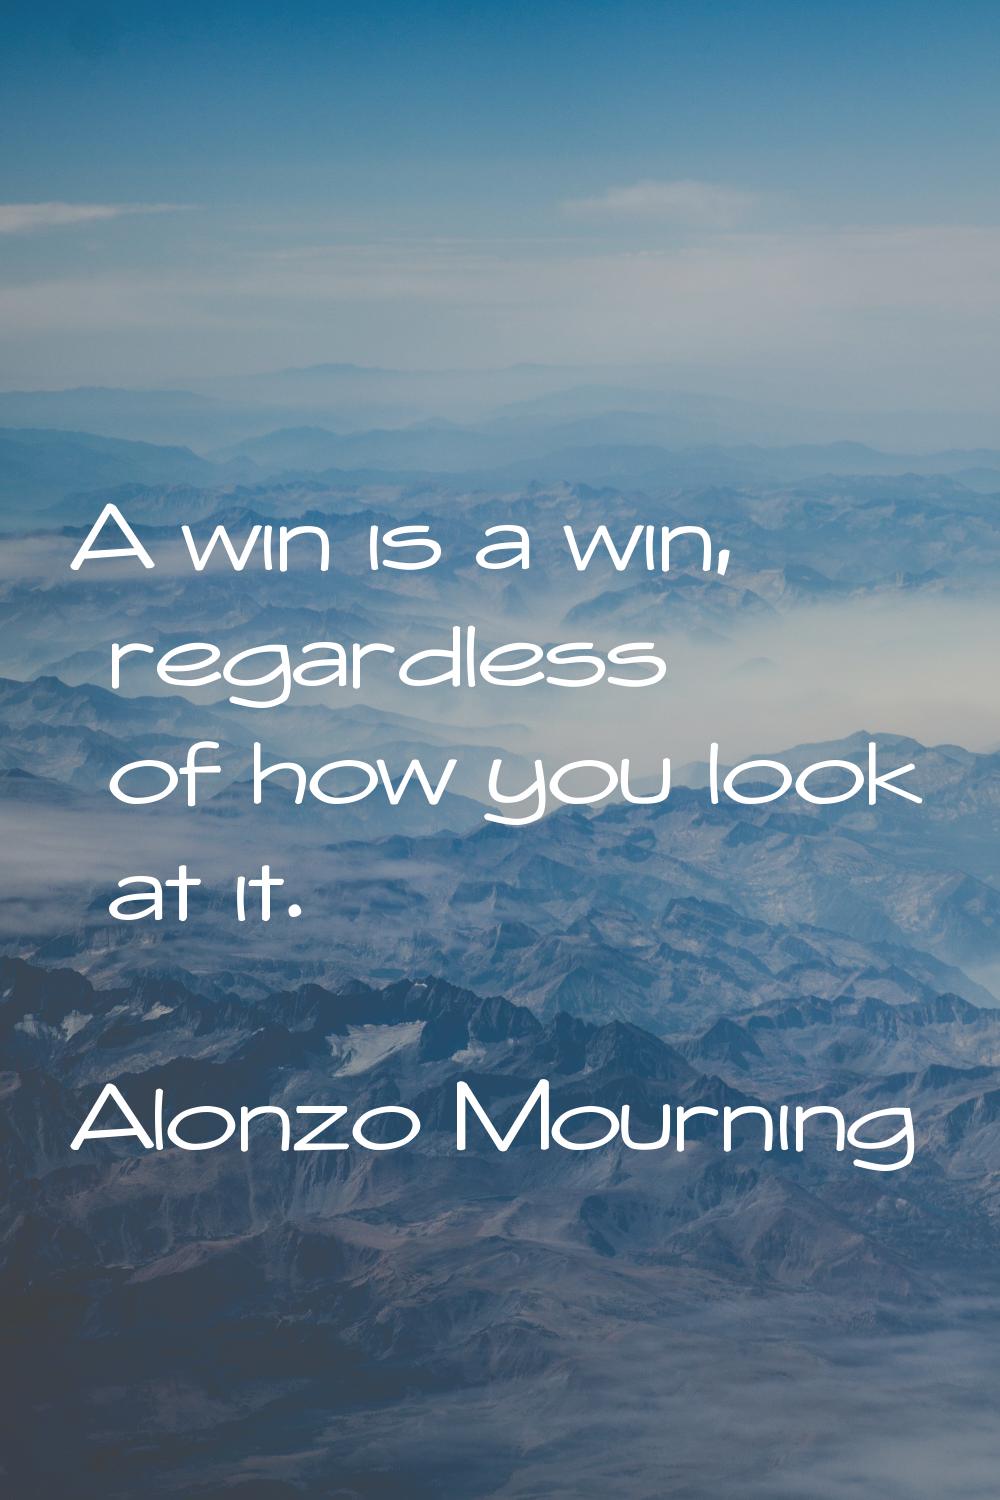 A win is a win, regardless of how you look at it.